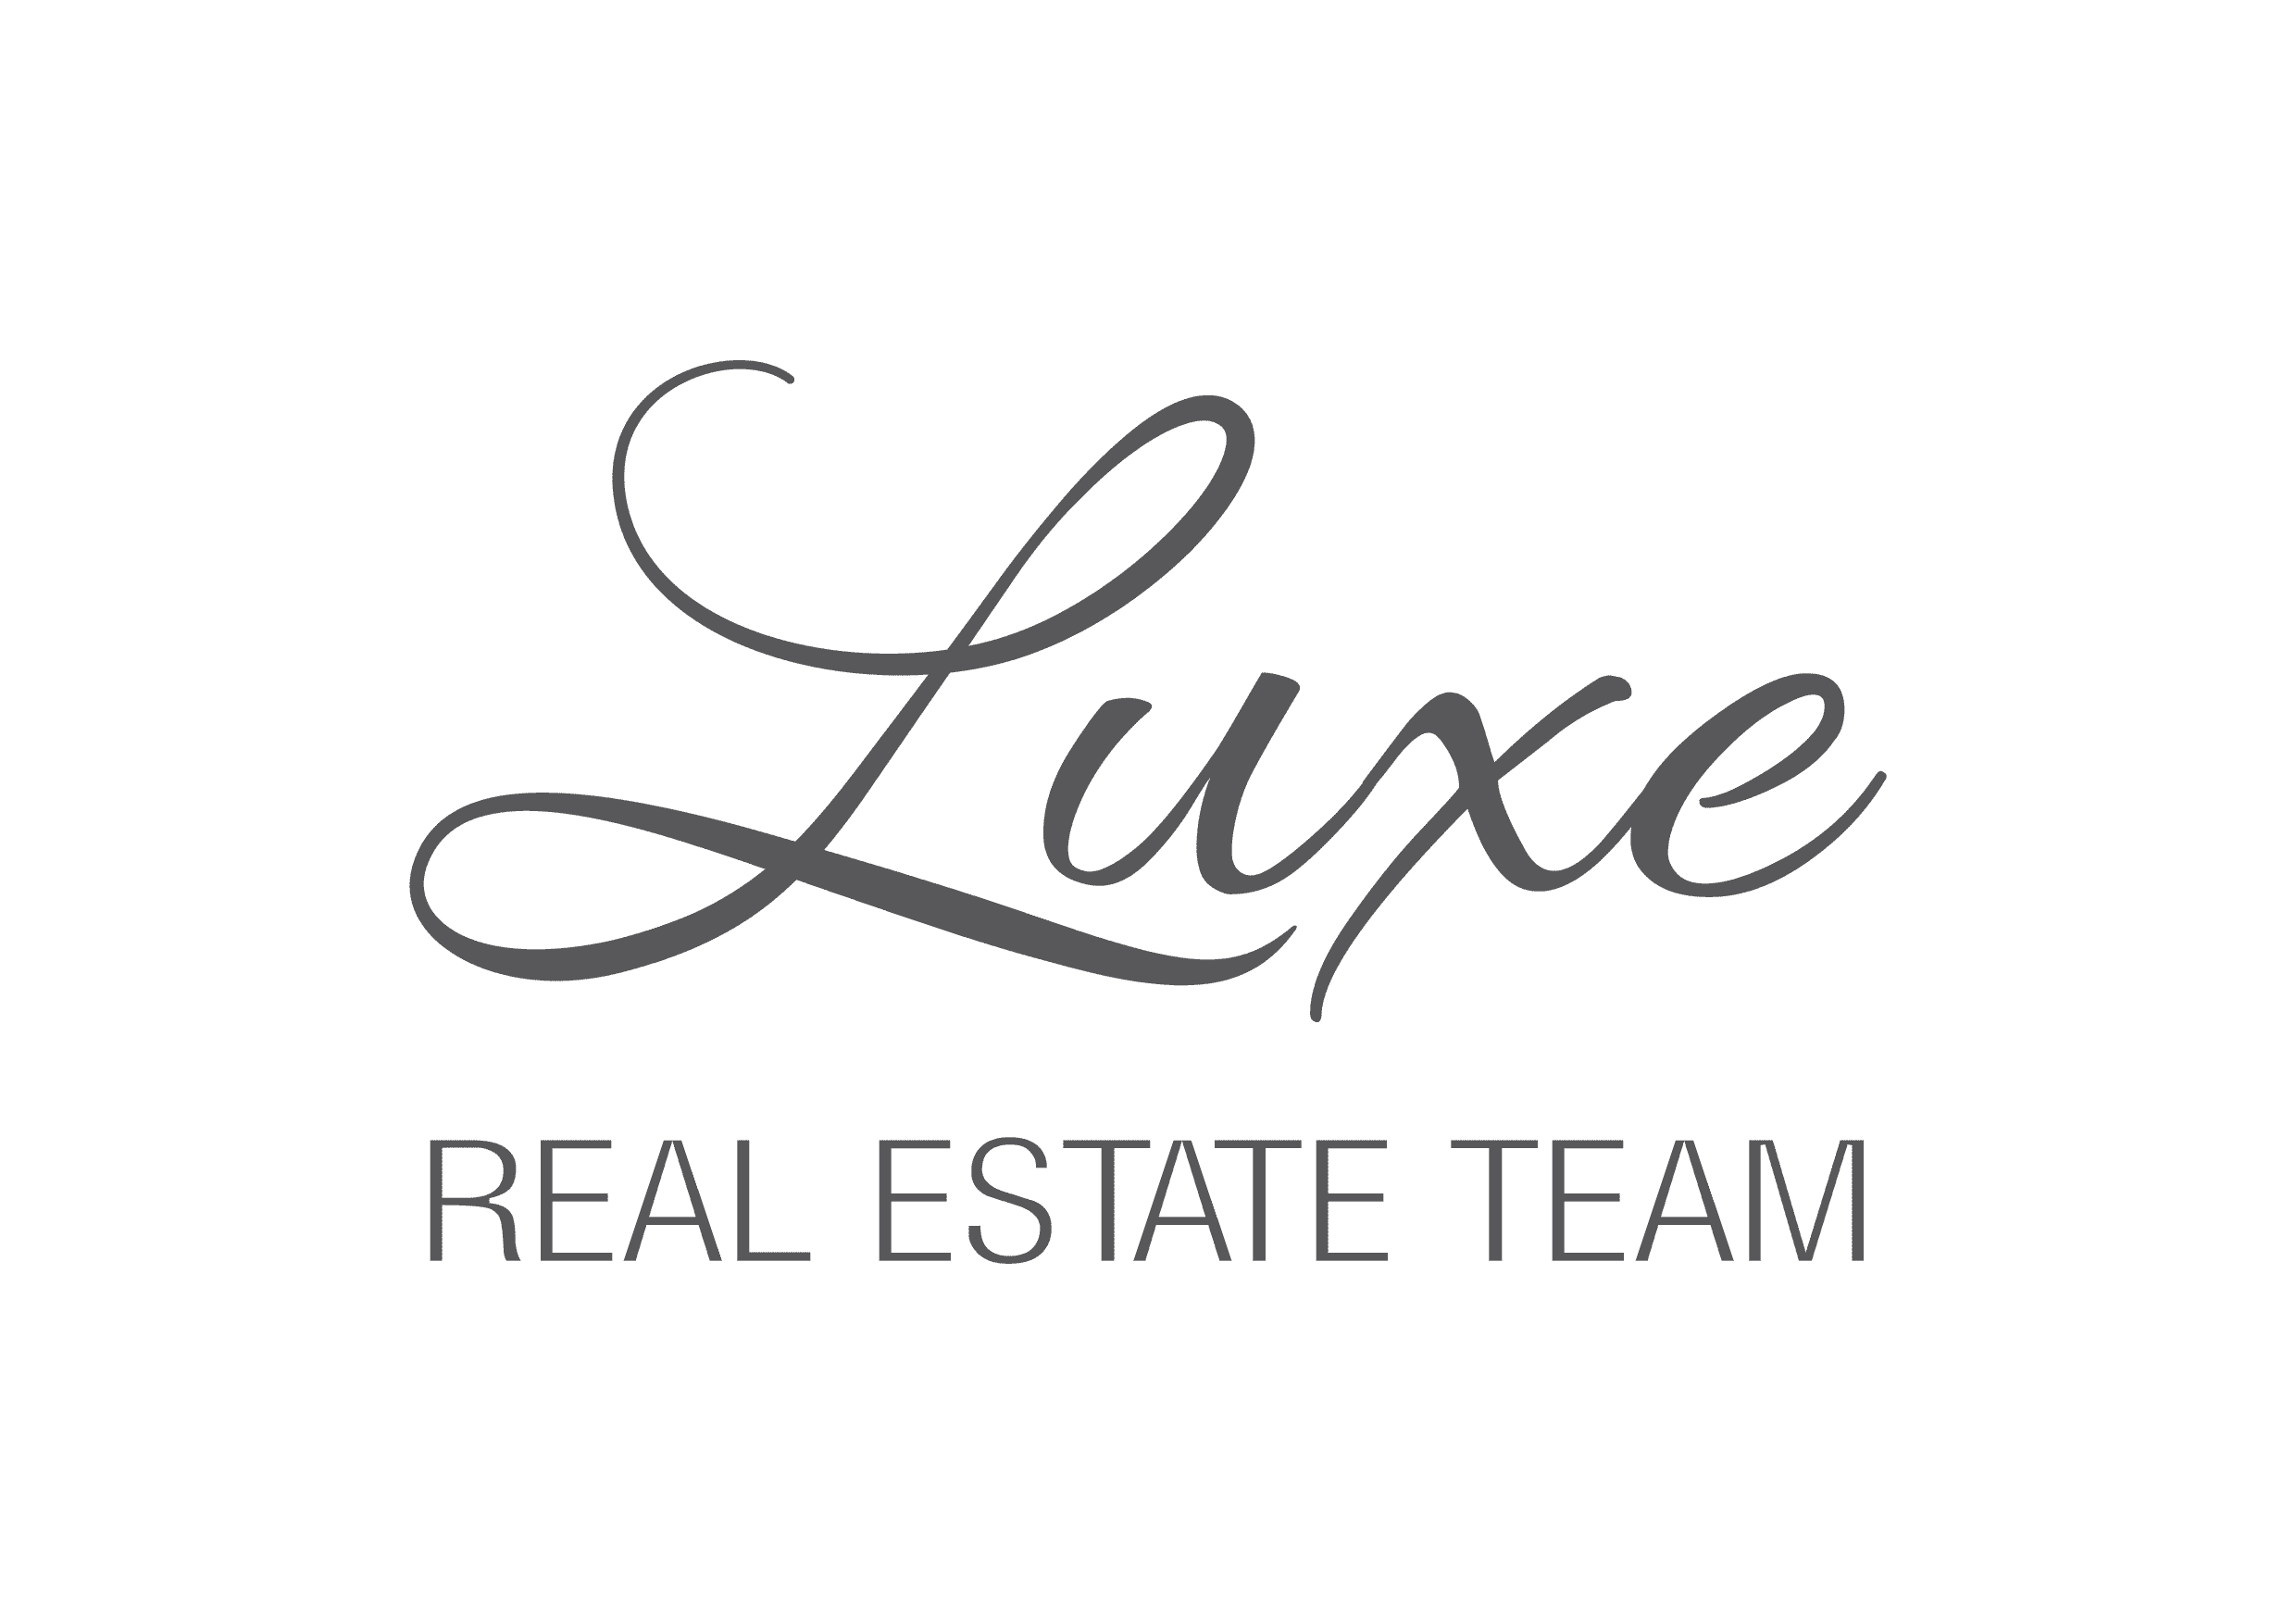 Luxe Real Estate Team